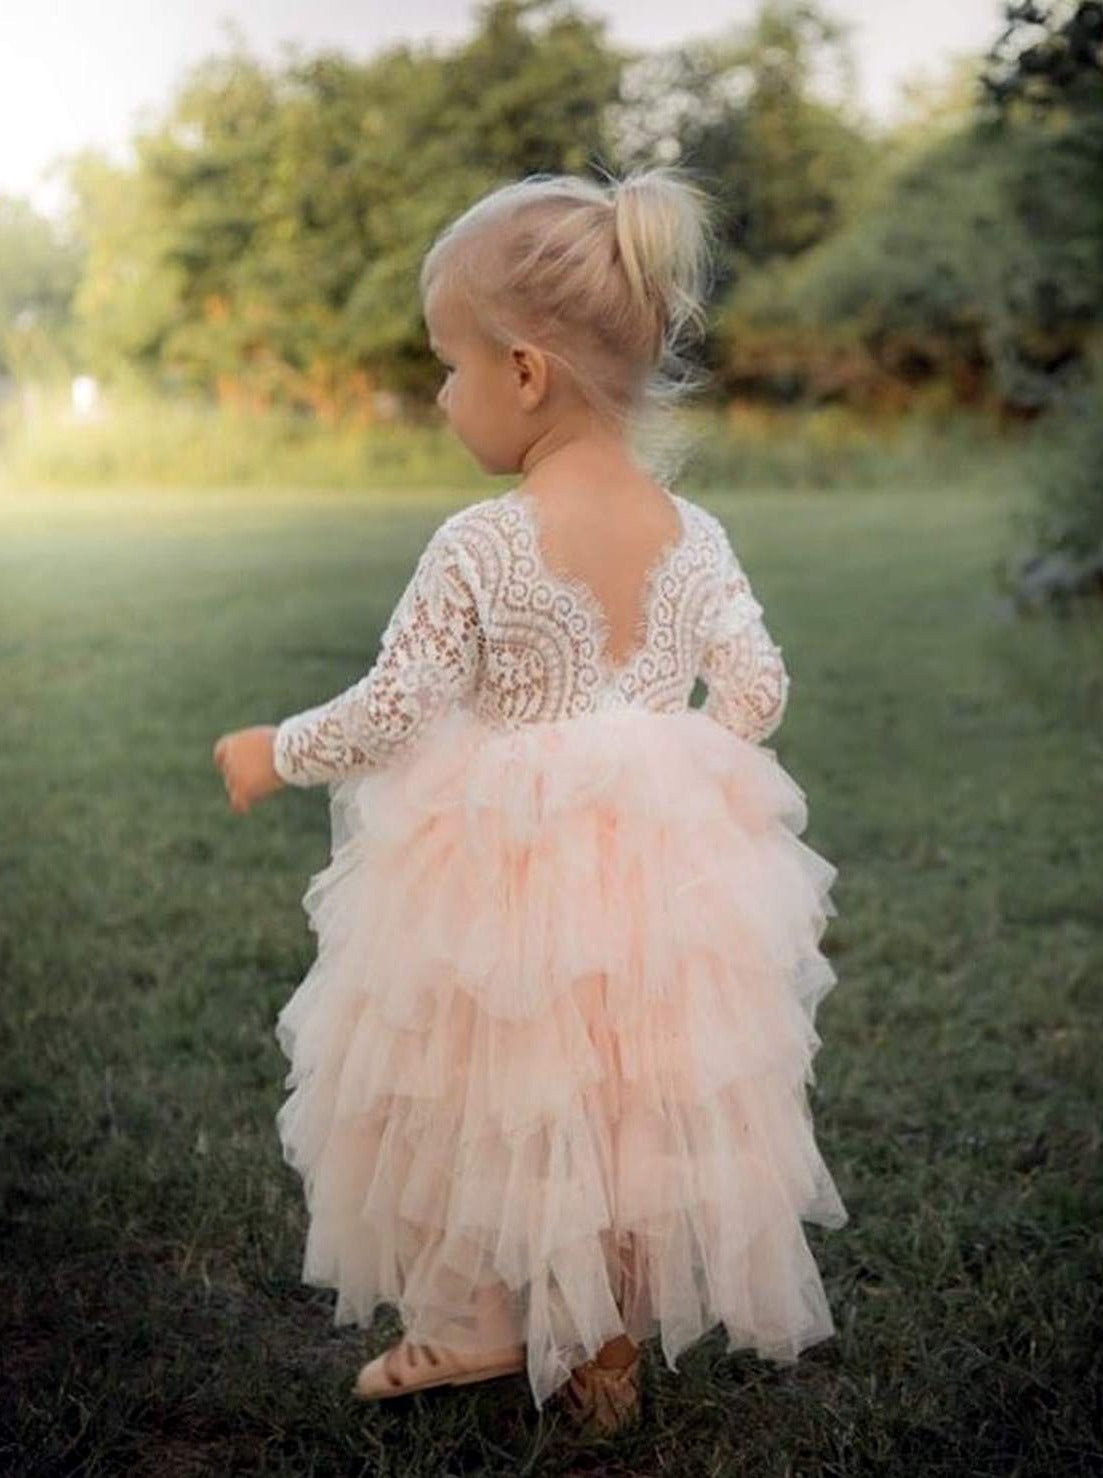 2Bunnies Flower Girl Dress Peony Lace Back A-Line Long Sleeve Tiered Tulle Maxi (Pink) - 2BUNNIES